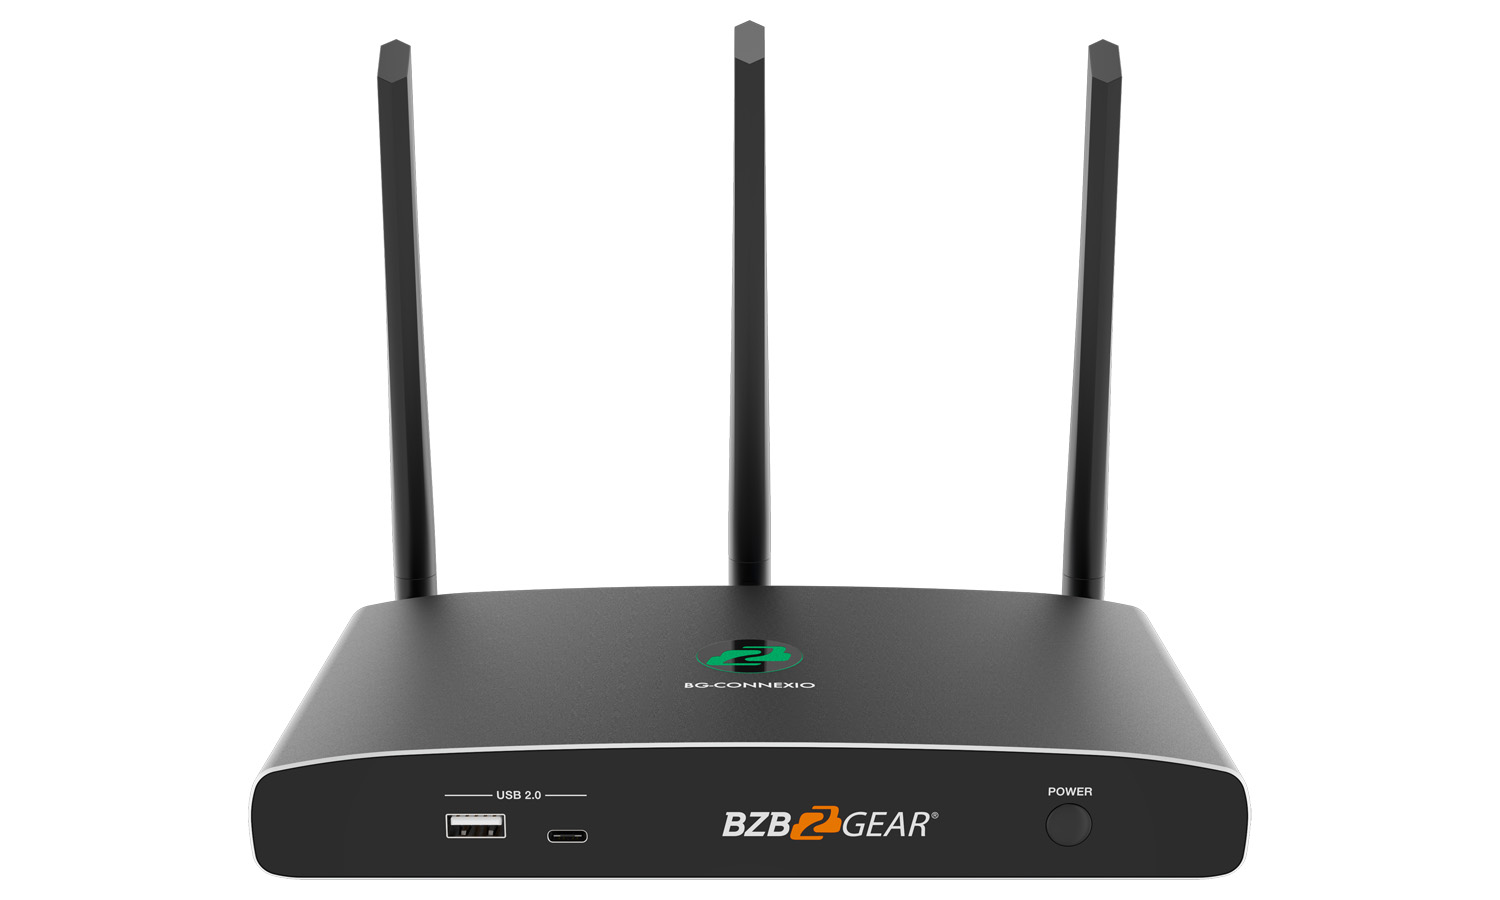 BG-Connexio 4K UHD Wireless BYOD Conference Room Presentation Collaboration Solution with Airplay/Miracast/Chromecast Support by BZBGEAR